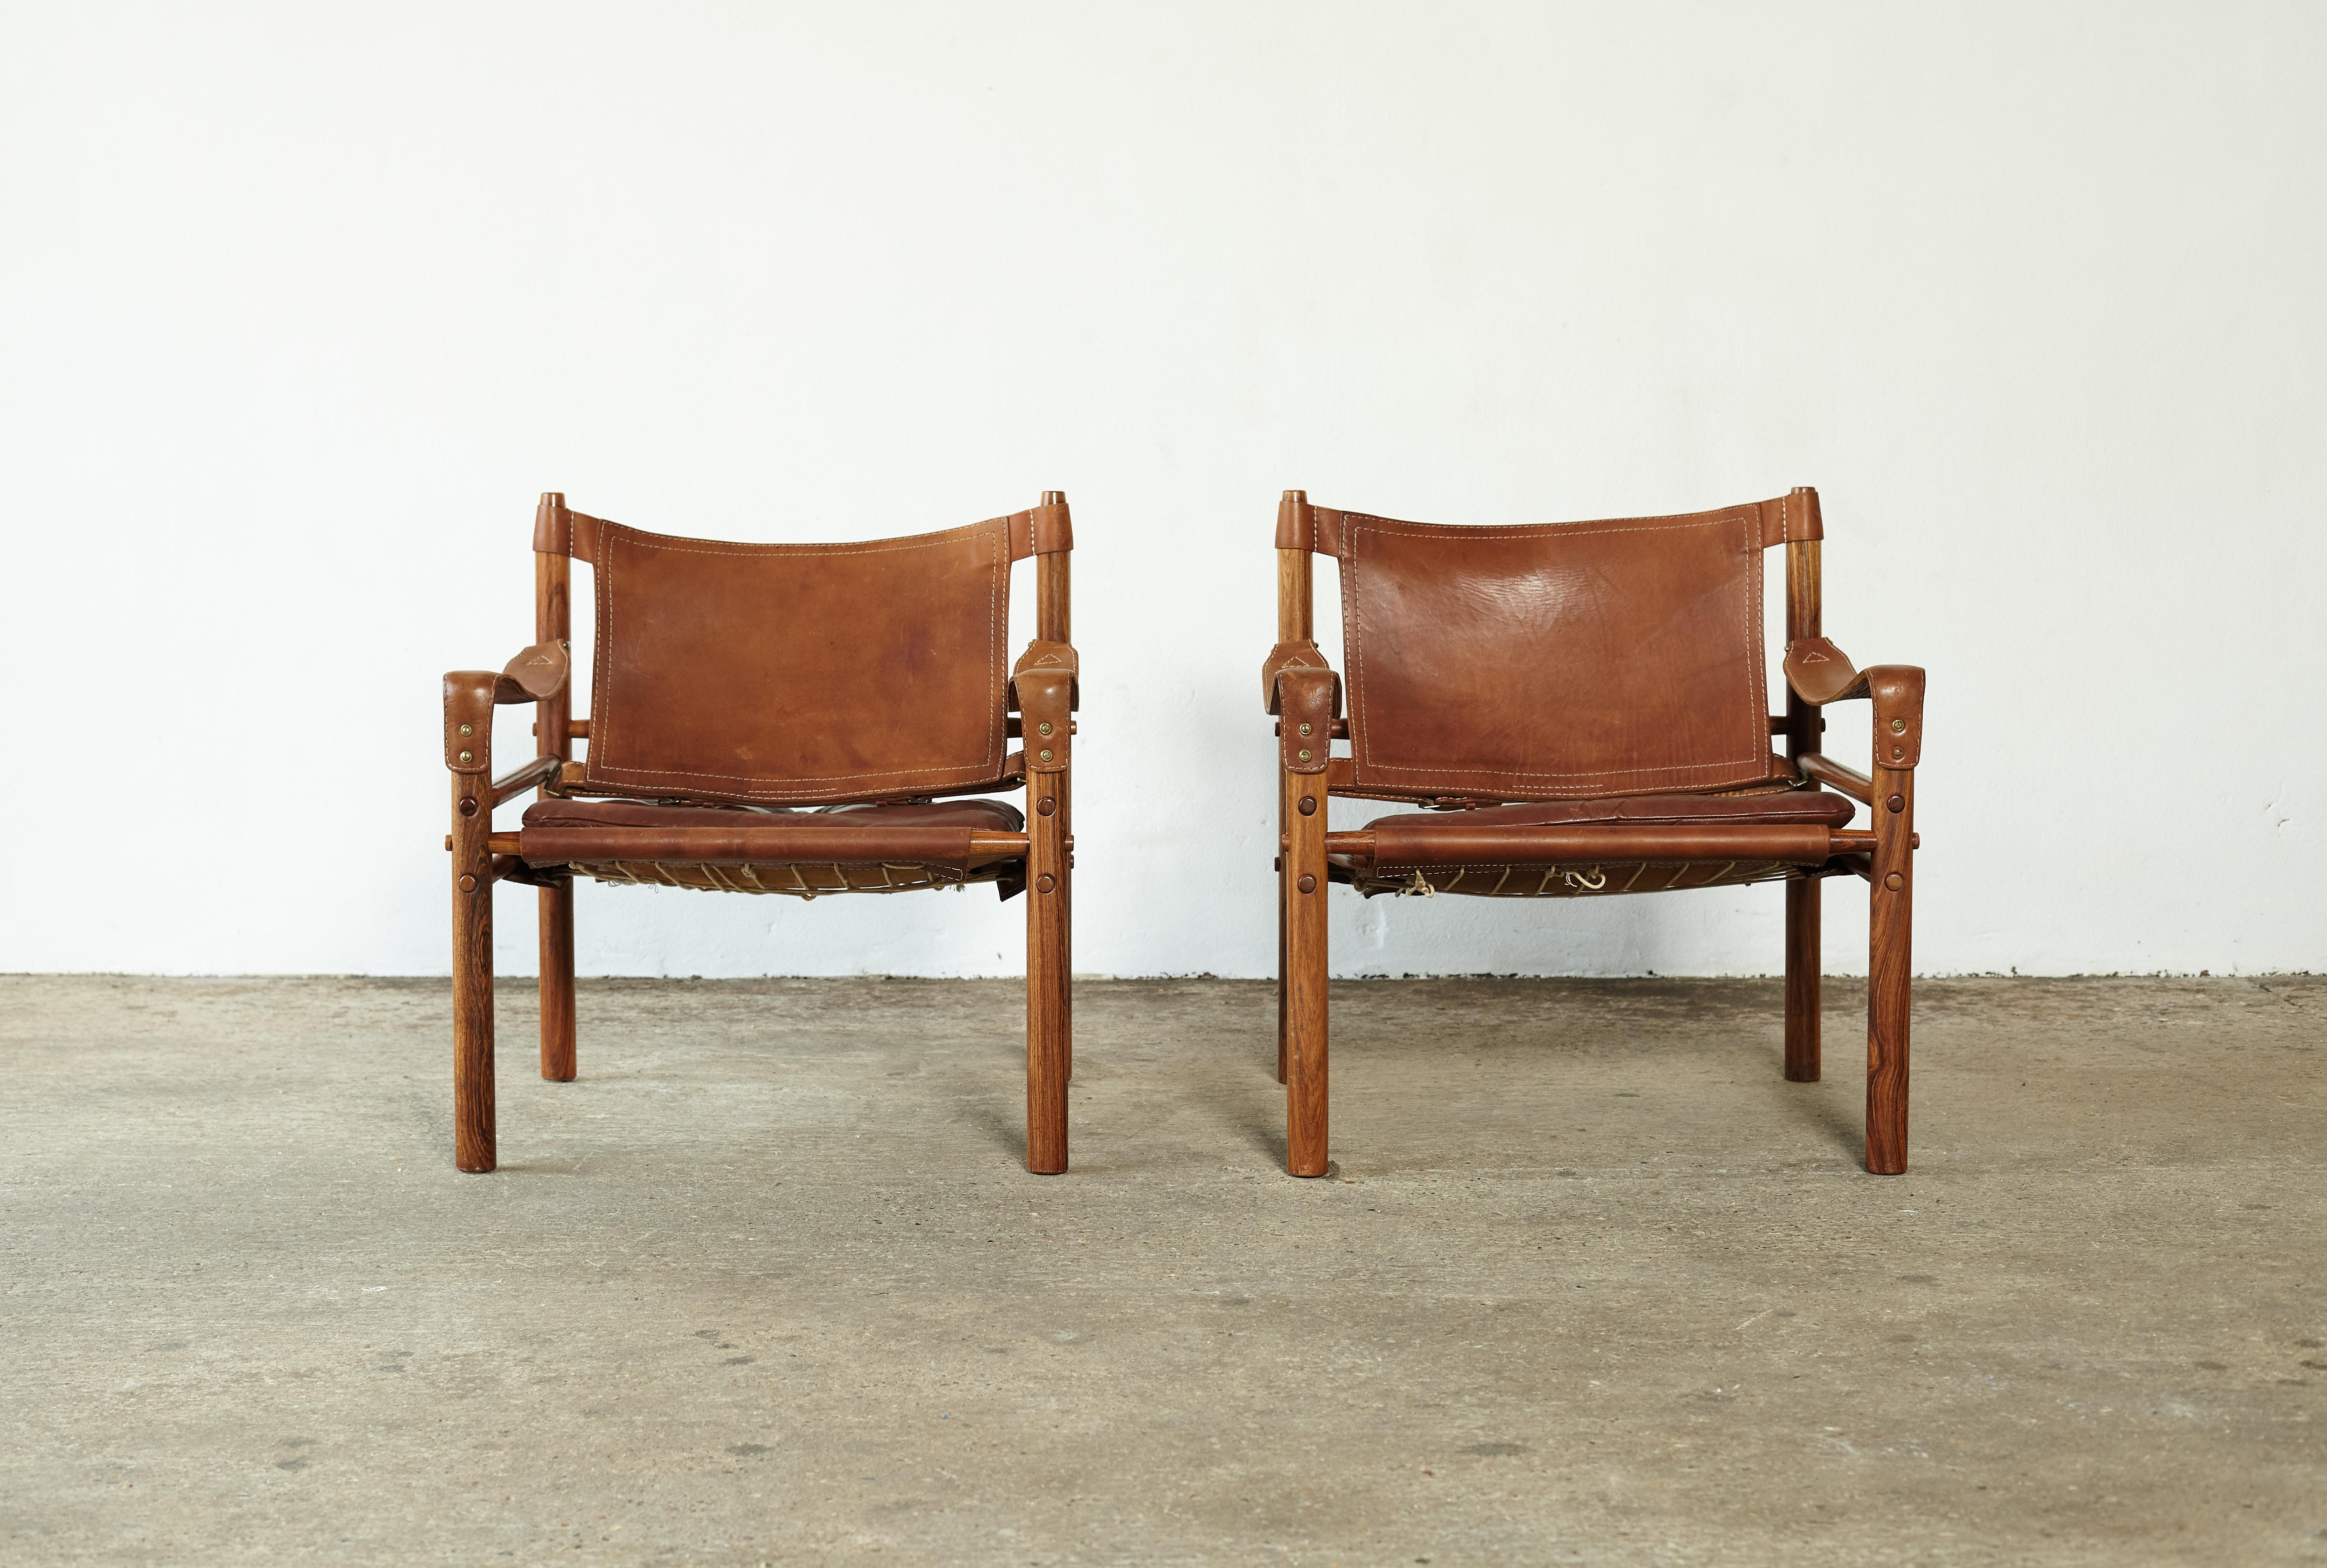 A super pair of authentic vintage Arne Norell safari sirocco chairs in rosewood and patinated brown leather. Made by Norell Mobler in Sweden. Very good original condition. 

The chairs will need to be disassembled for shipping but were designed to